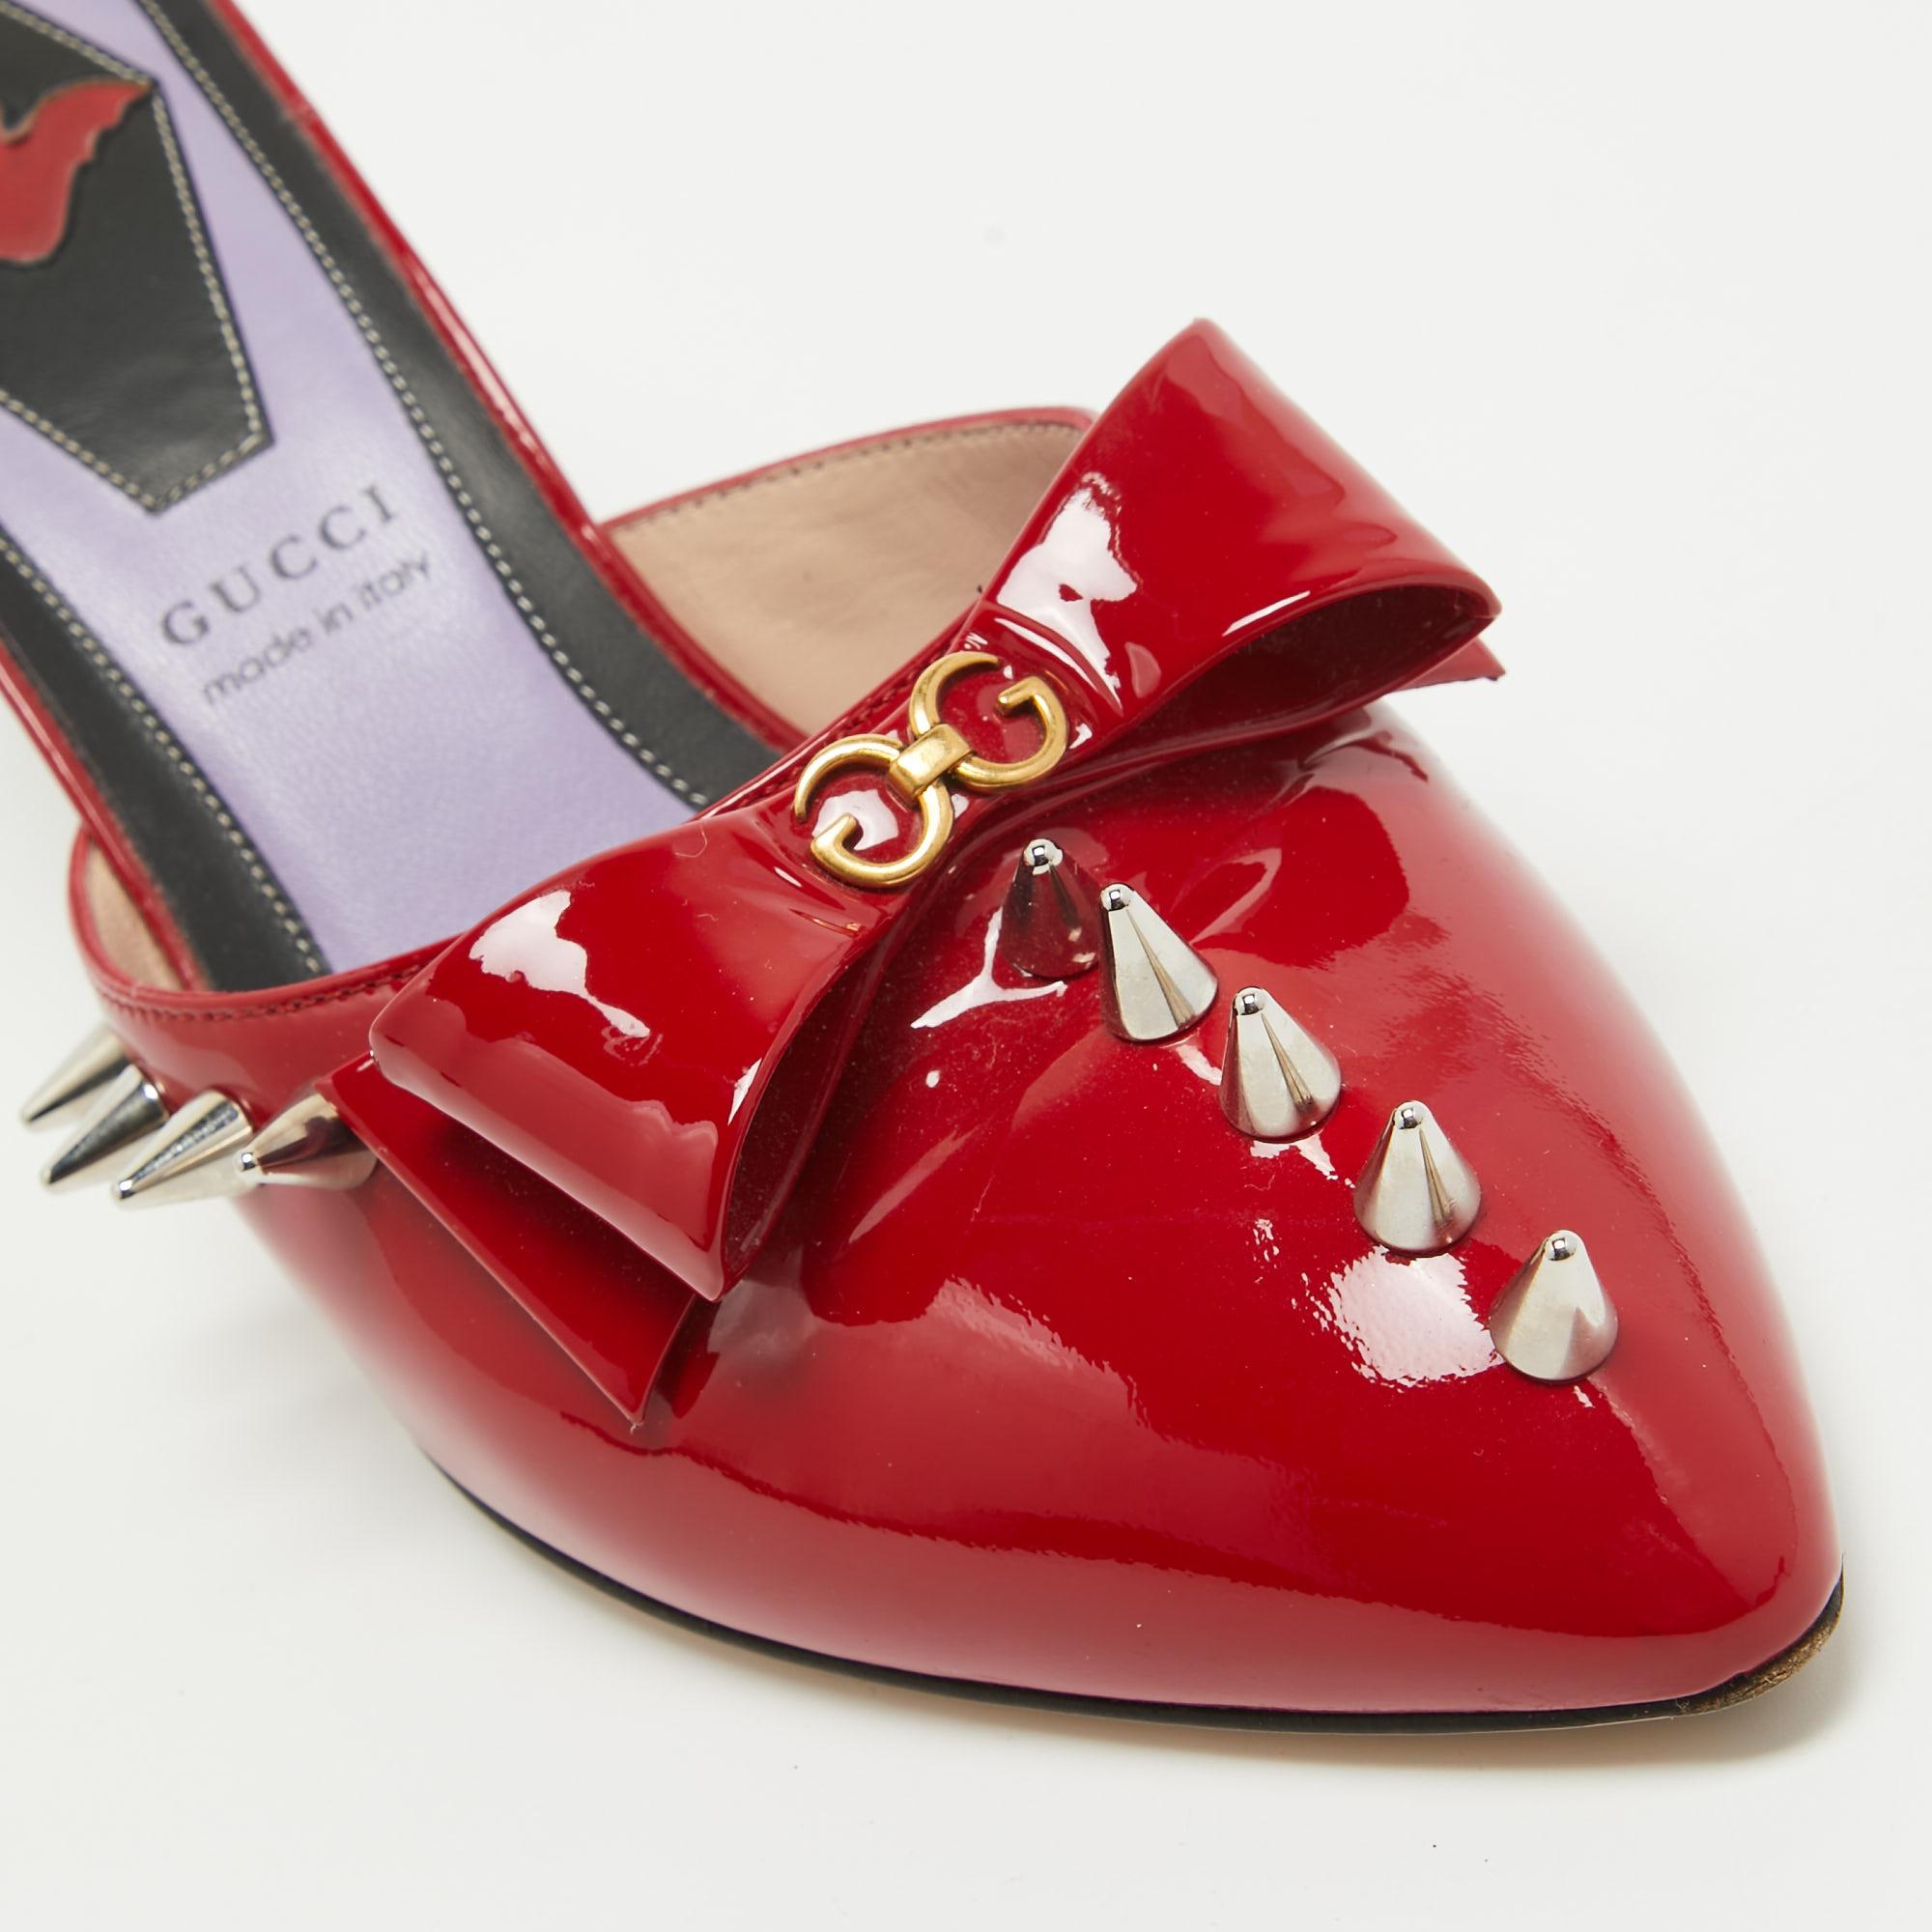 Gucci Red Patent Leather Sadie Mules Size 37.5 For Sale 2